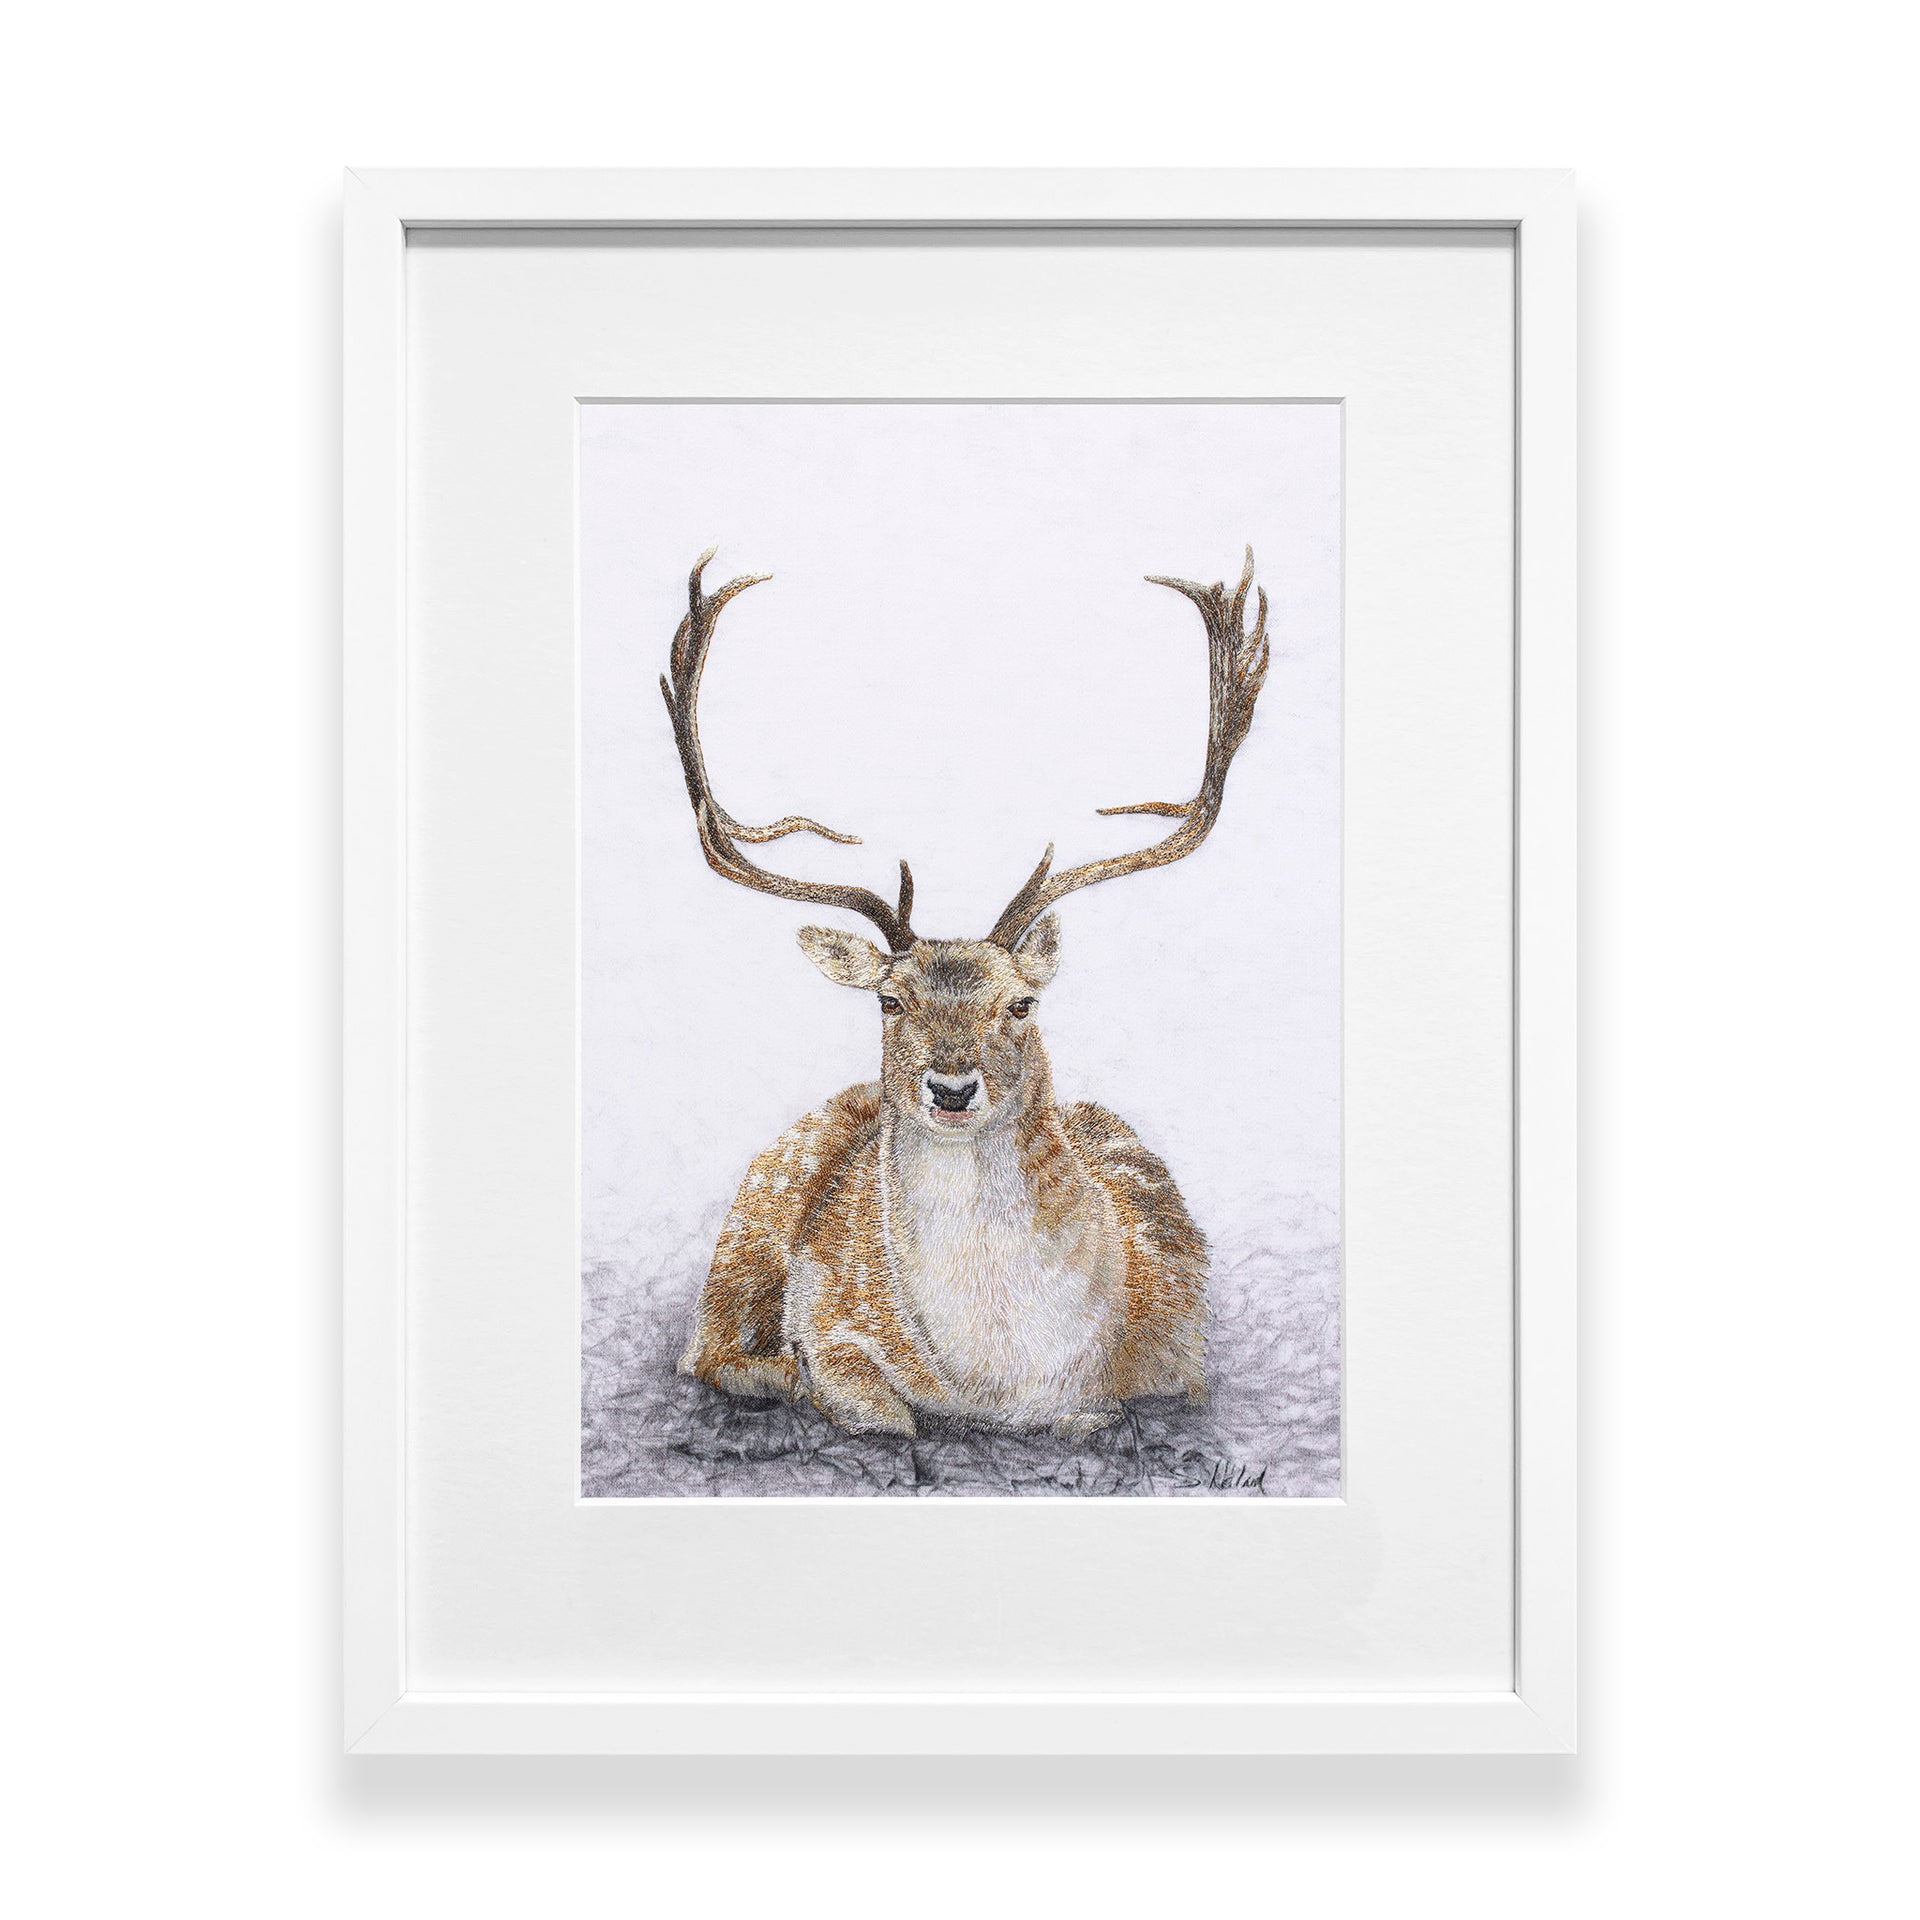 Hand embroidered sitting Deer artwork in a white frame